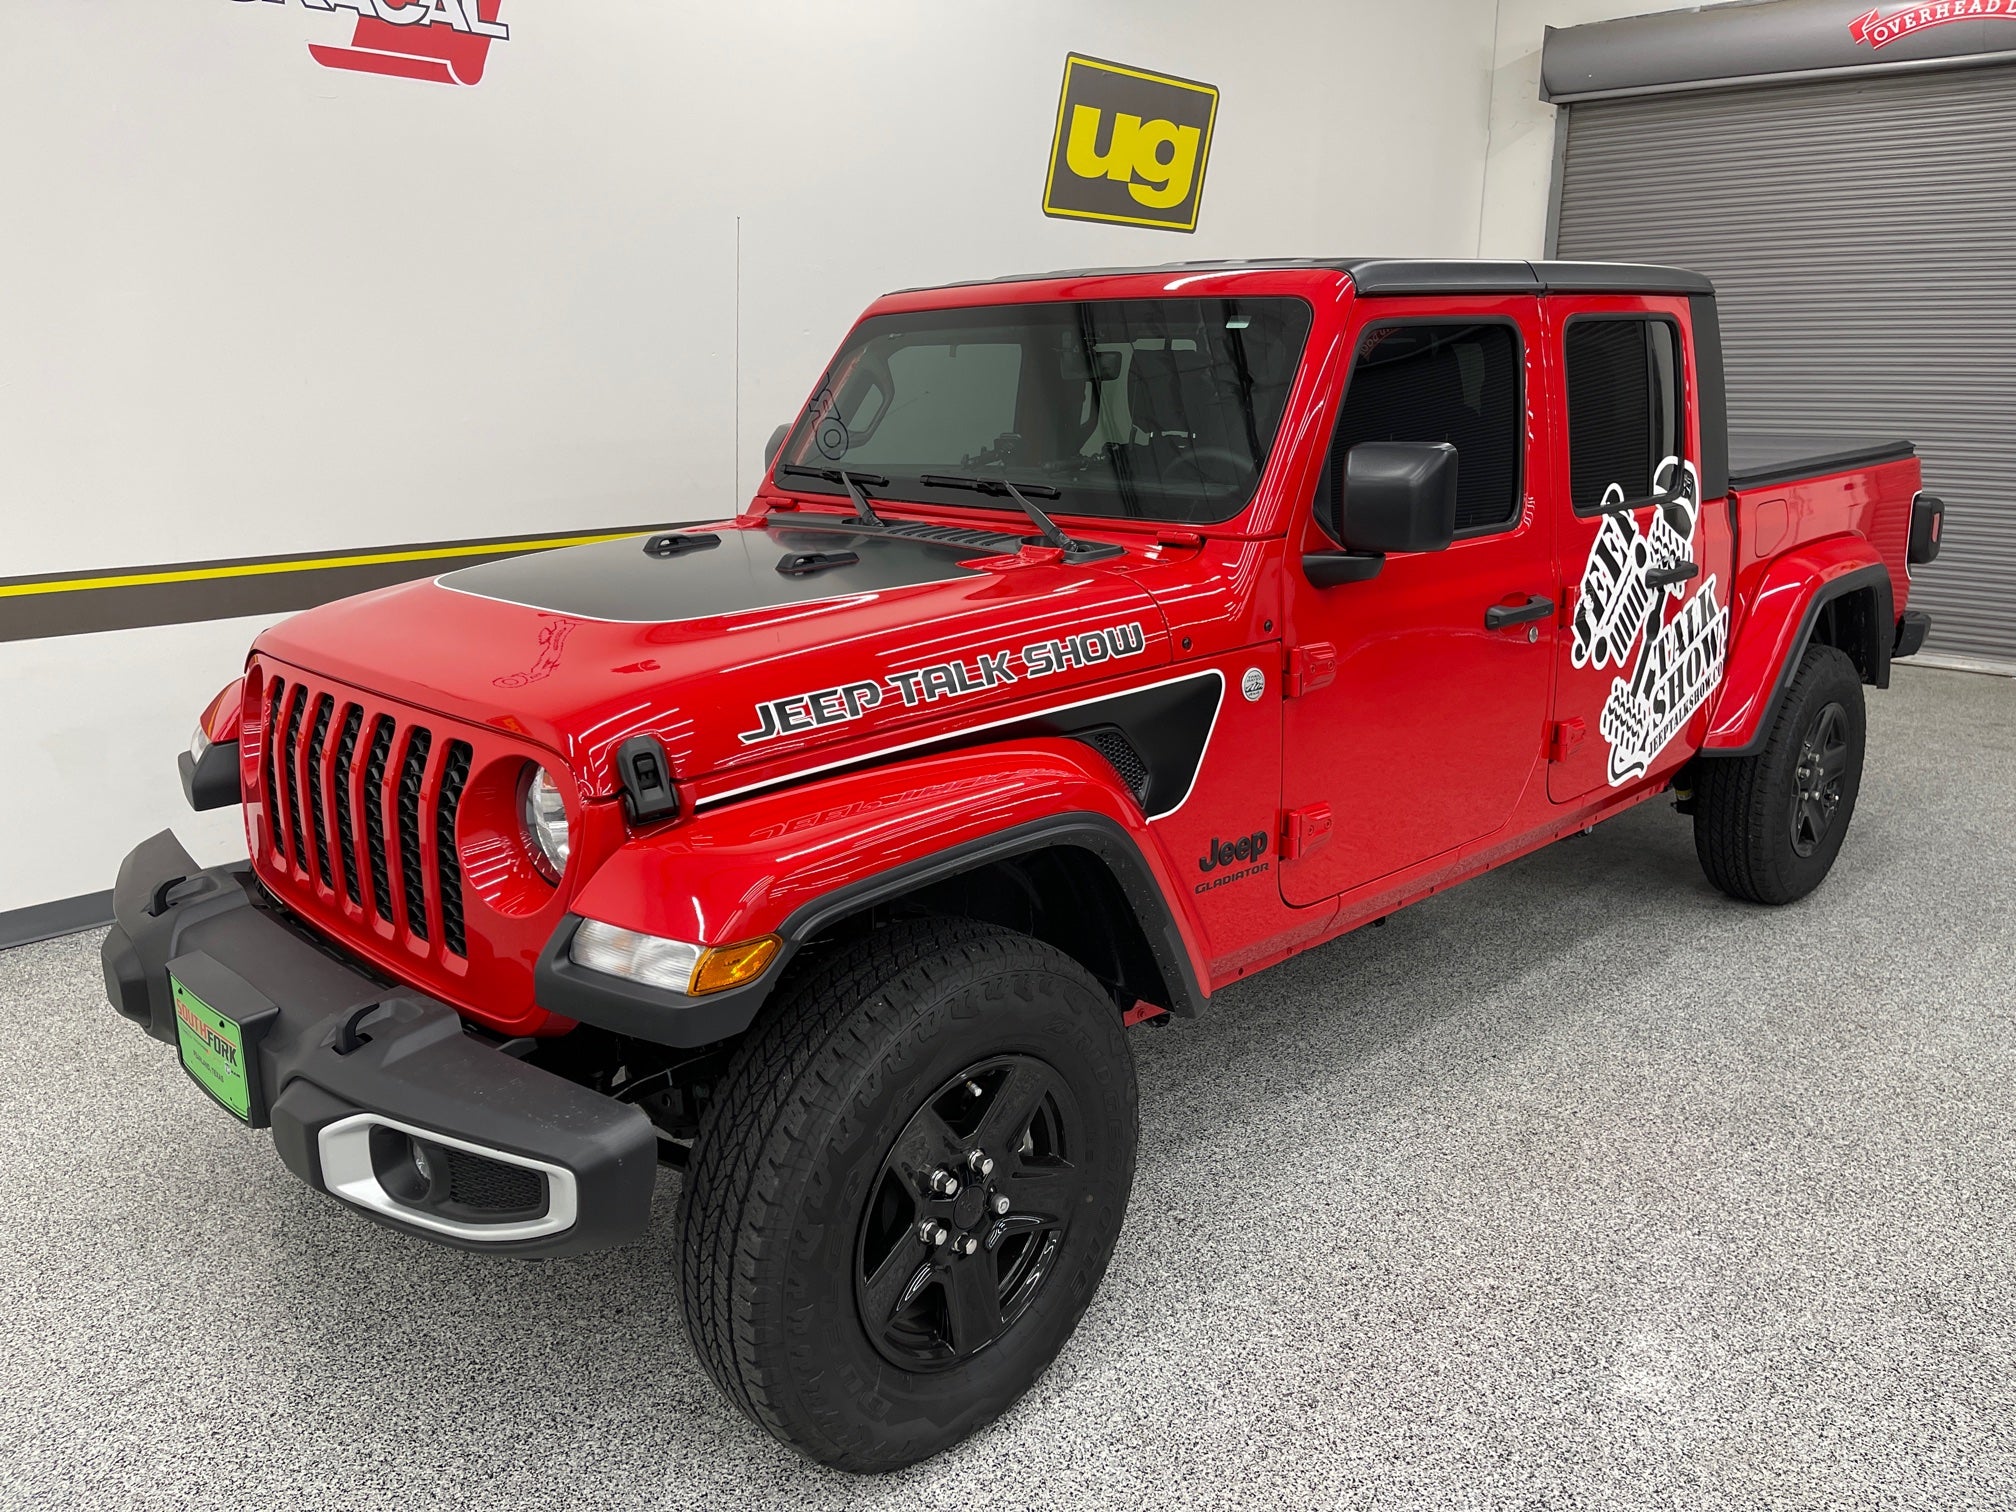 Jeep Names (Sold As A Pair) – Underground Graphics